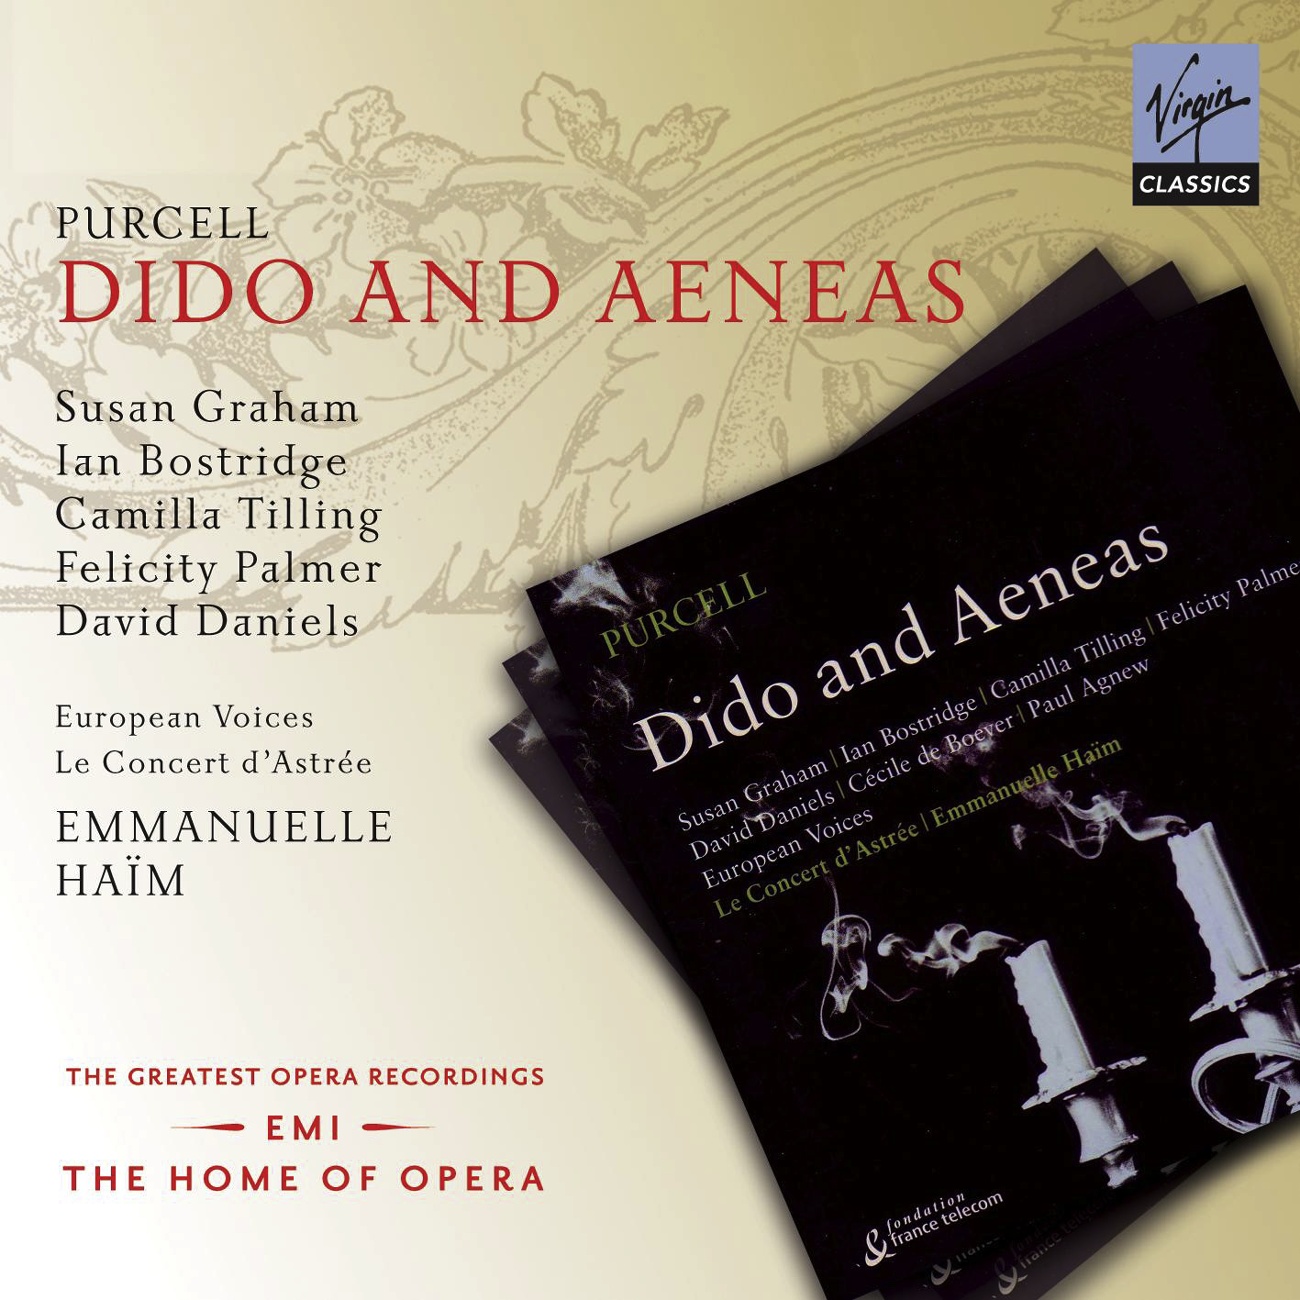 Dido and Aeneas, ACT 3, Scene 1: The Ships: The Sailors' Dance